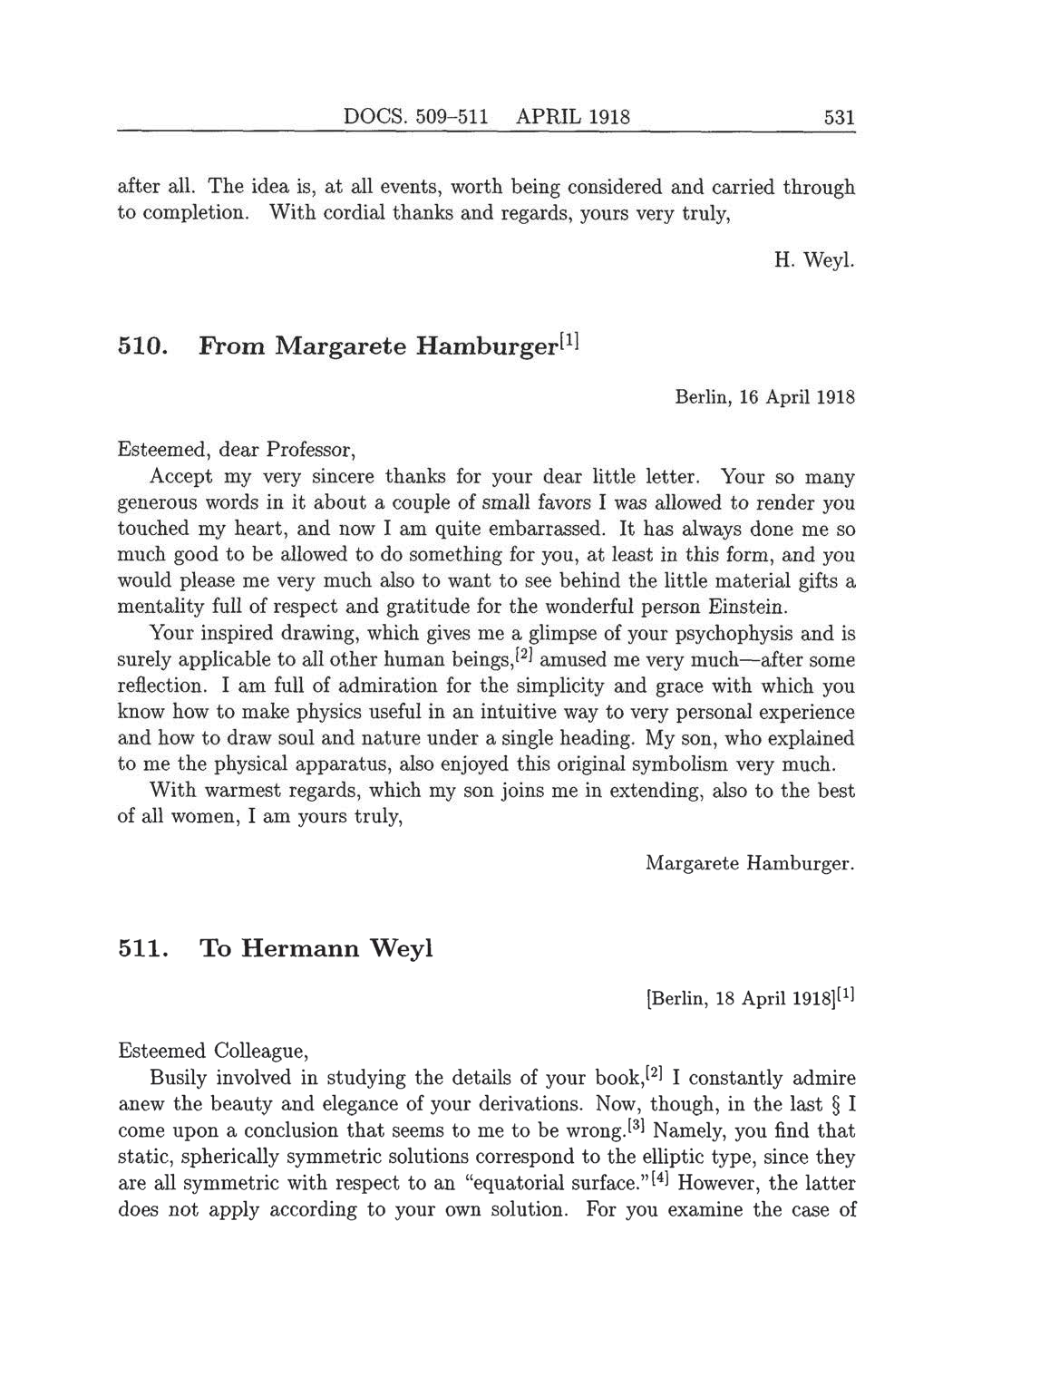 Volume 8: The Berlin Years: Correspondence, 1914-1918 (English translation supplement) page 531